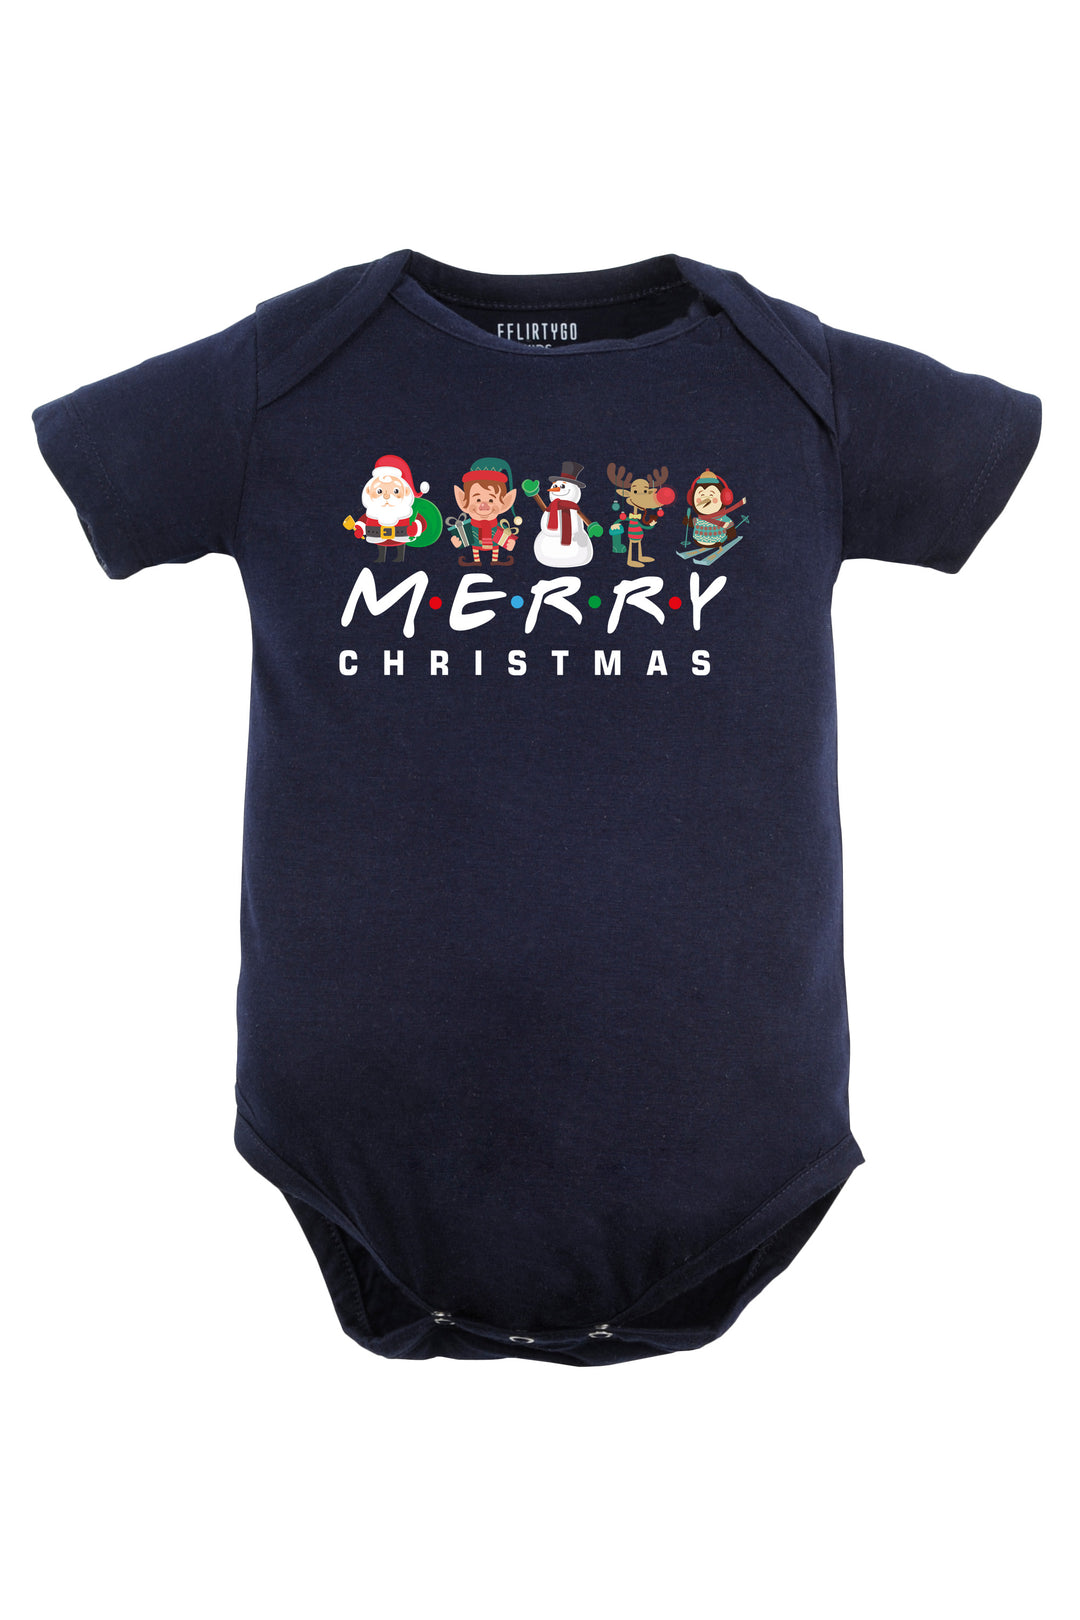 Merry Christmas with Christmas Characters Baby Romper | Onesies